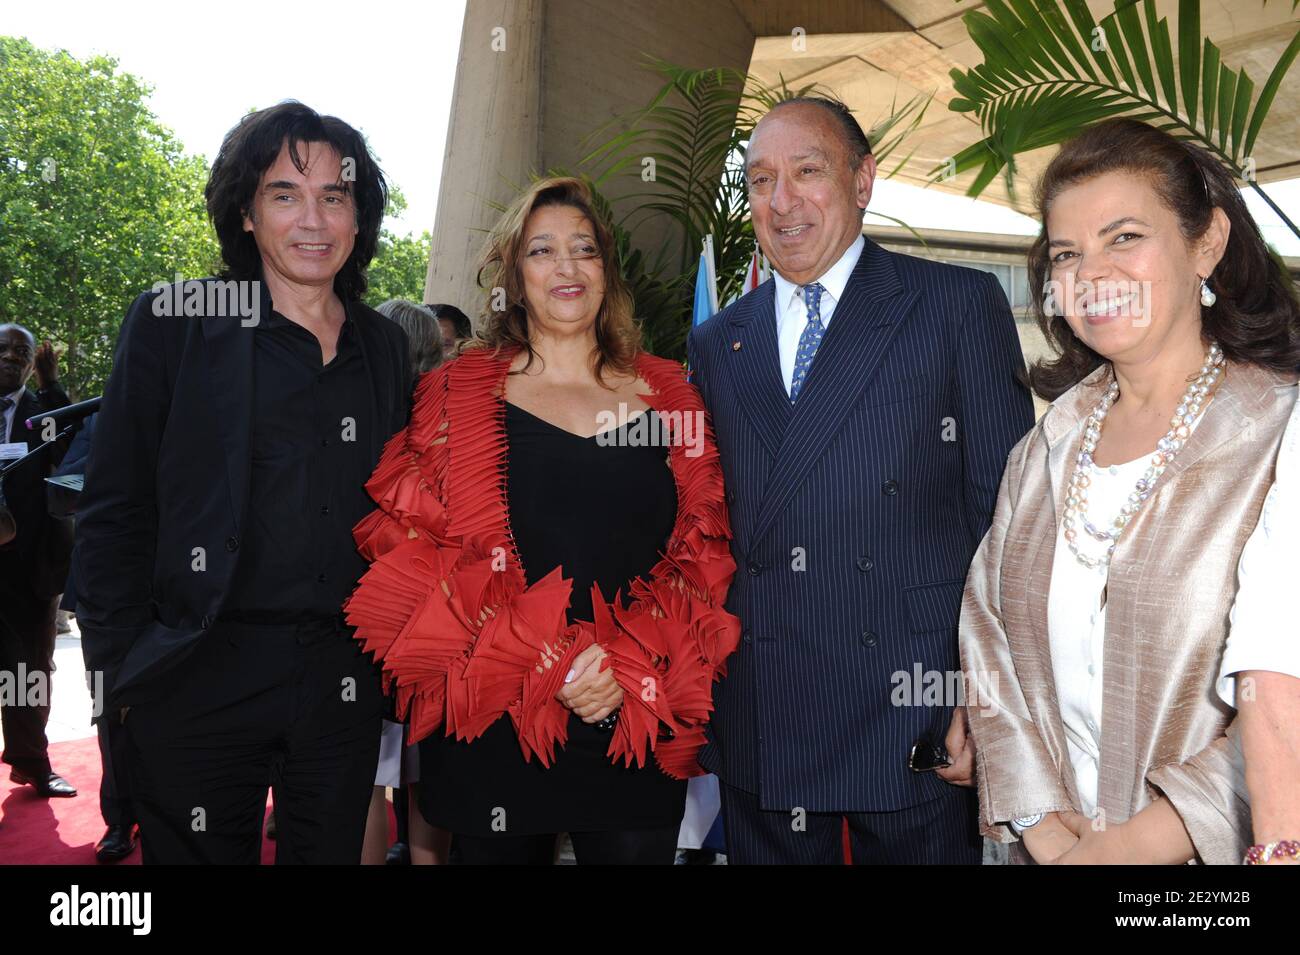 French musician Jean-Michel Jarre congratulates Iraqi-born British architect  Zaha Hadid (2nd from L) as she is named UNESCO Artist for Peace in a  ceremony at UNESCO (United Nations Education Sciences and Culture